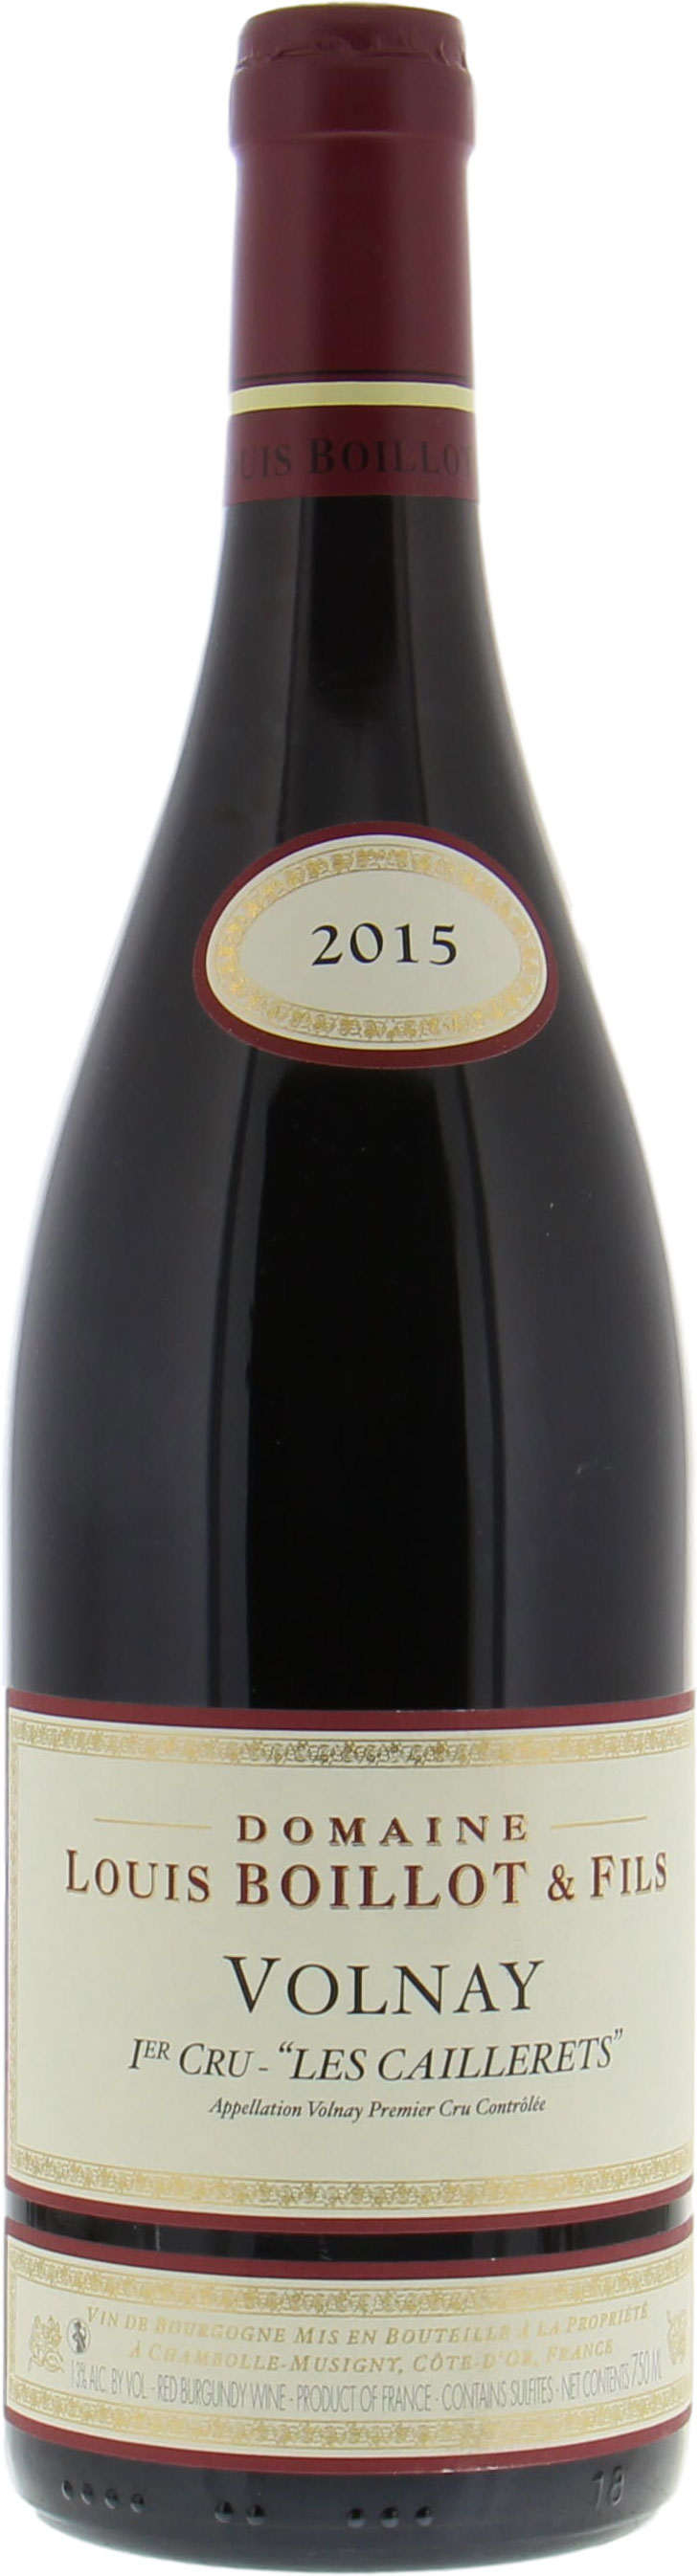 Domaine Louis Boillot - Volnay 1er Cru Les Caillerets 2015 Perfect